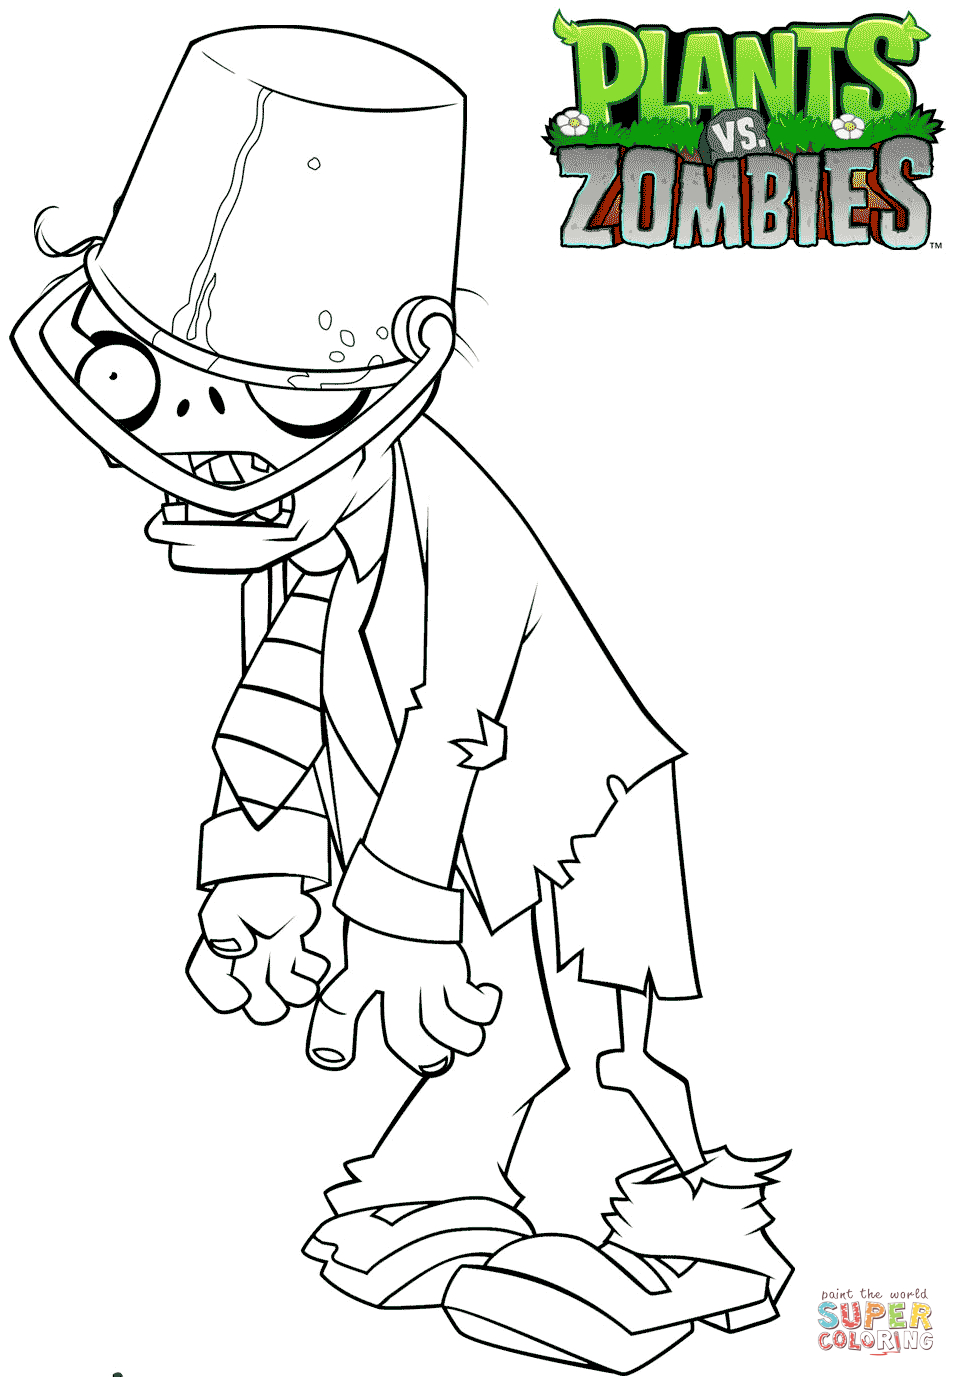 Plant Vs Zombie Coloring Pages Plants Vs Zombies Buckethead Zombie Coloring Page Free Printable